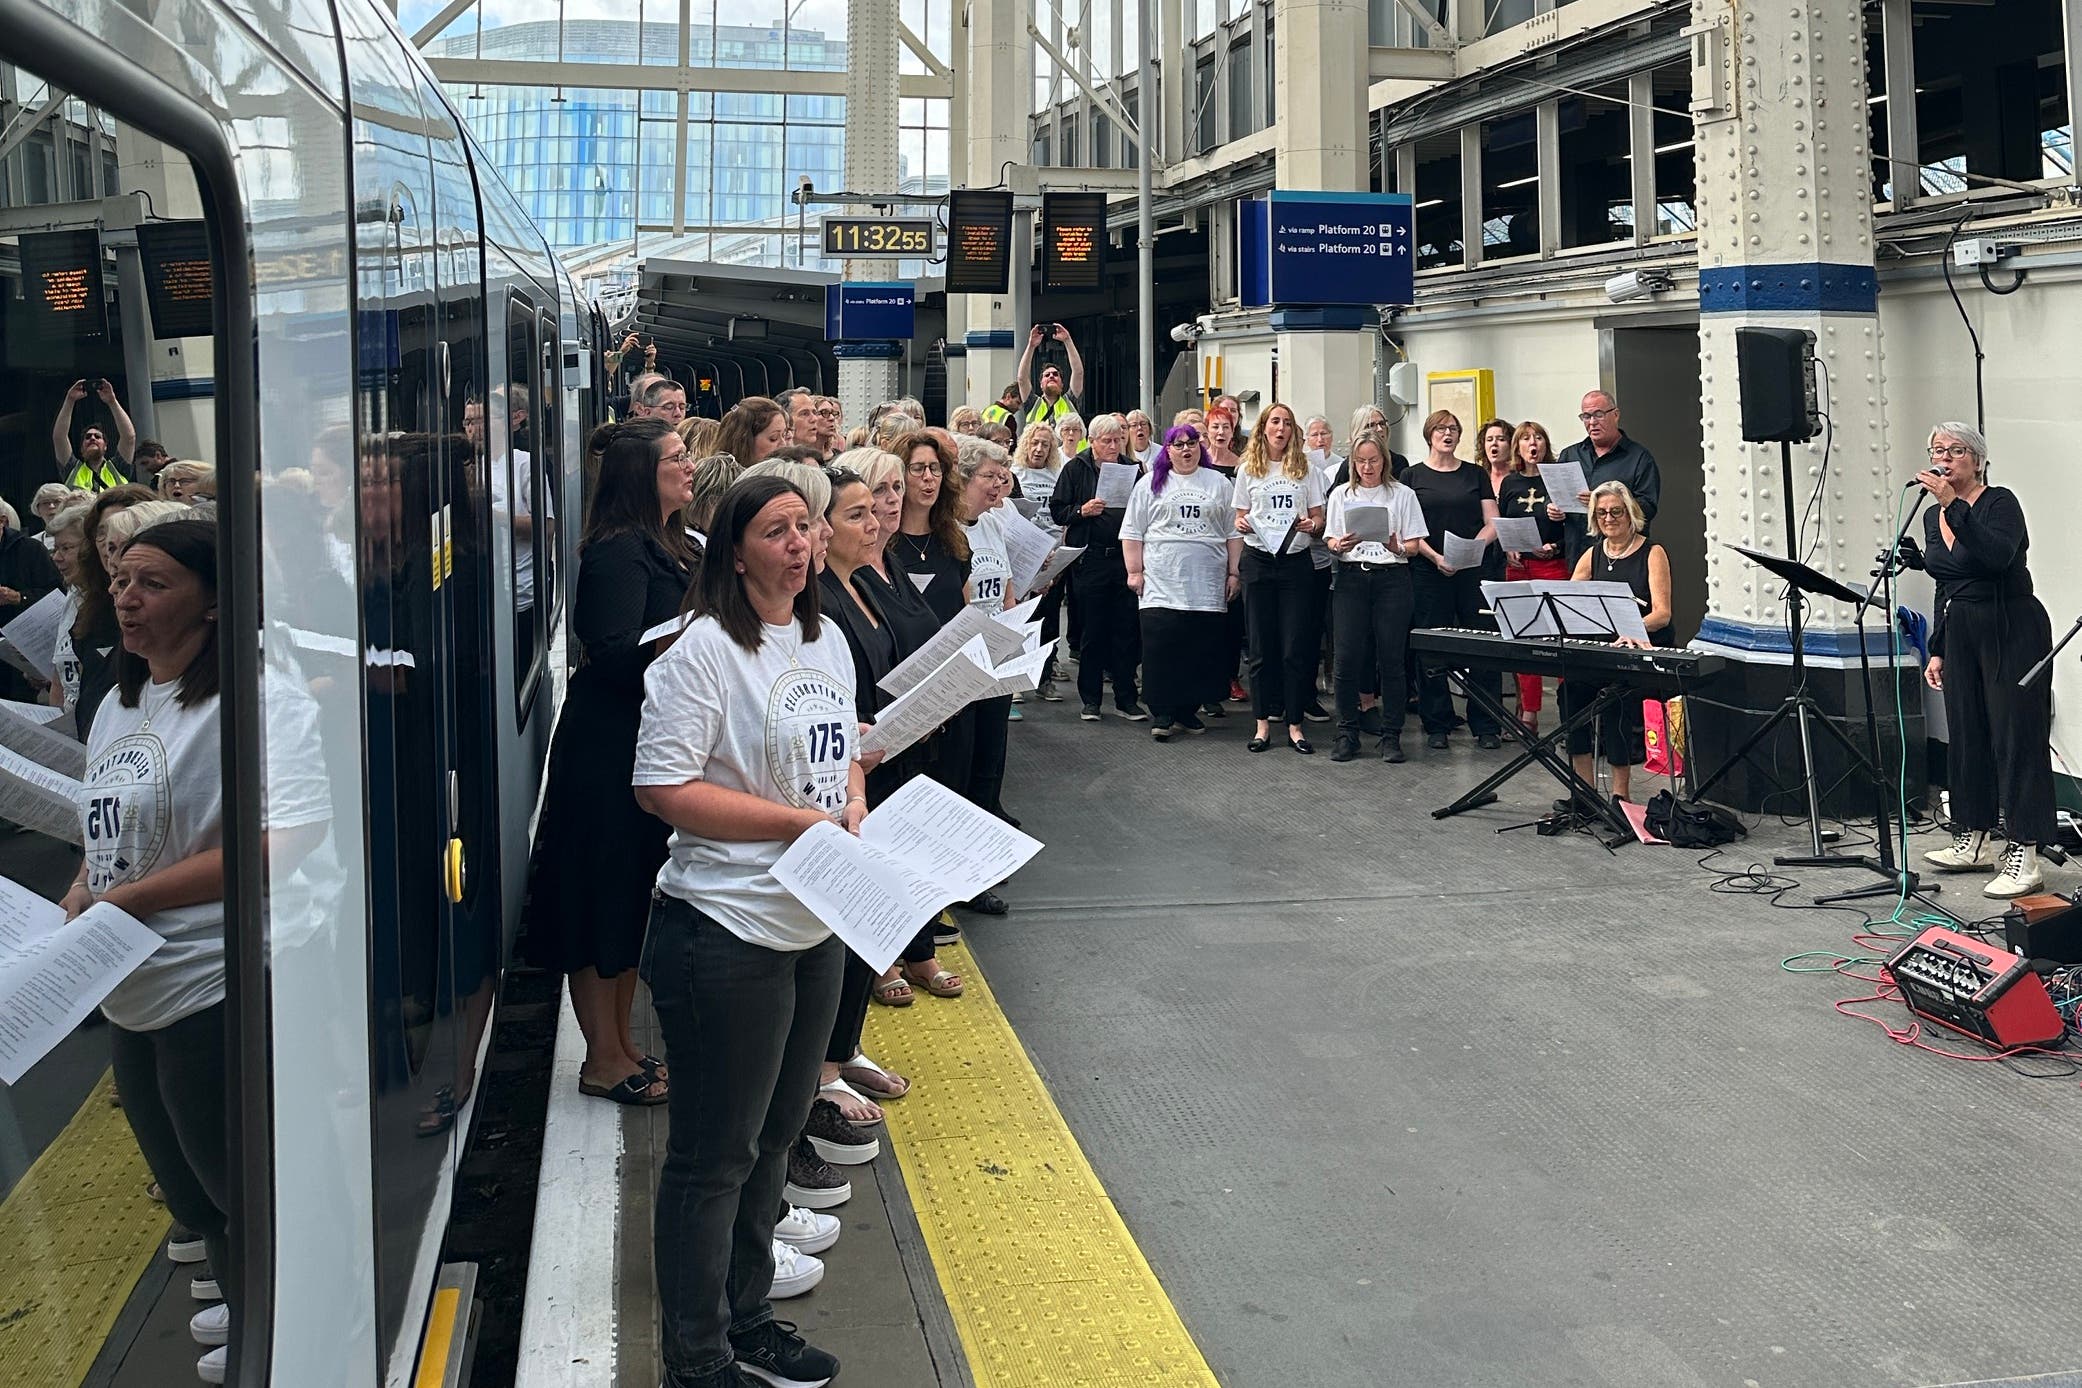 Network Rail and South Western Railway staff formed a choir to serenade passengers at London Waterloo to mark the station’s 175th anniversary (Network Rail/PA)